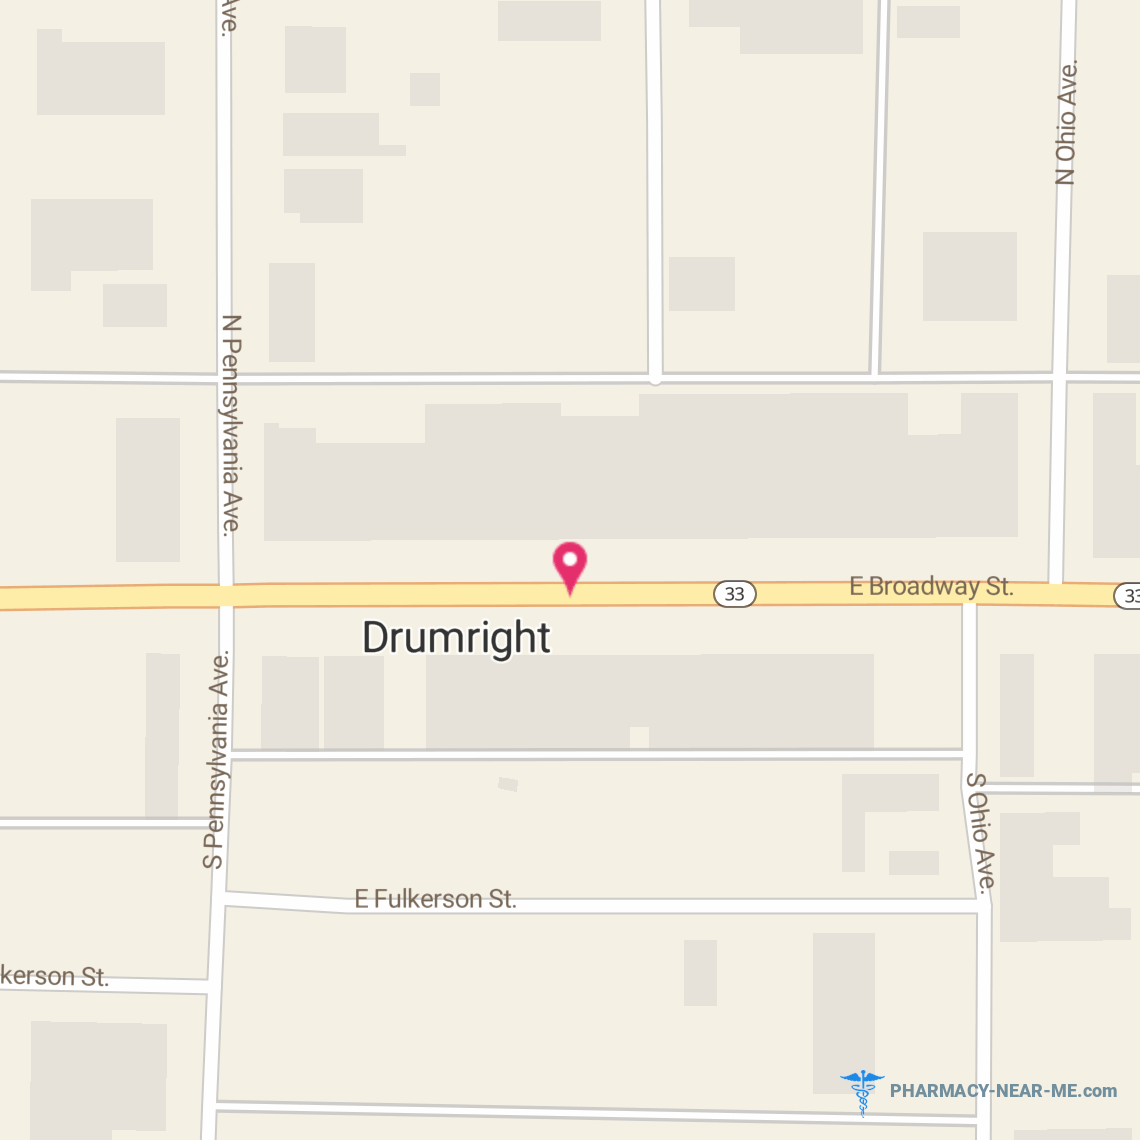 MURPHY DRUG - Pharmacy Hours, Phone, Reviews & Information: 145 East Broadway Street, Drumright, Oklahoma 74030, United States